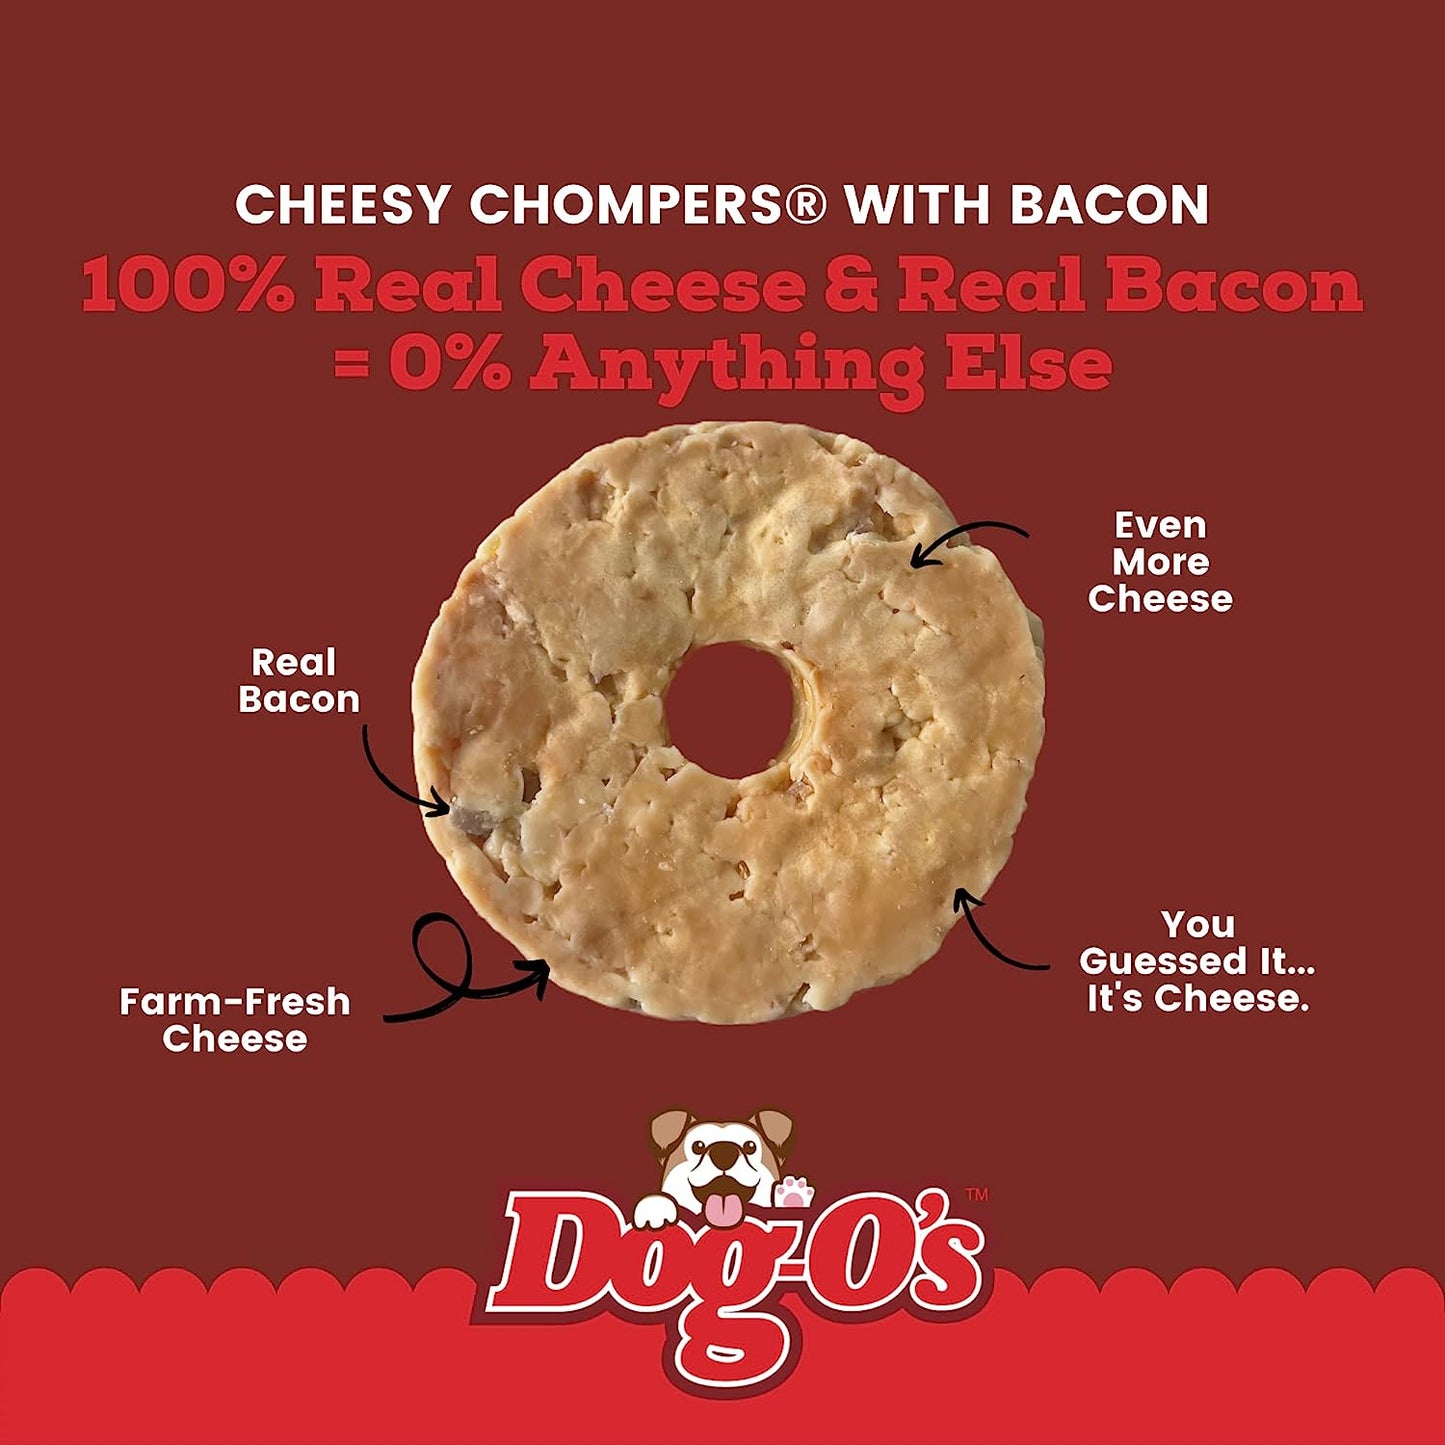 DOGOS CHEESE CHOMPERS BACON SM